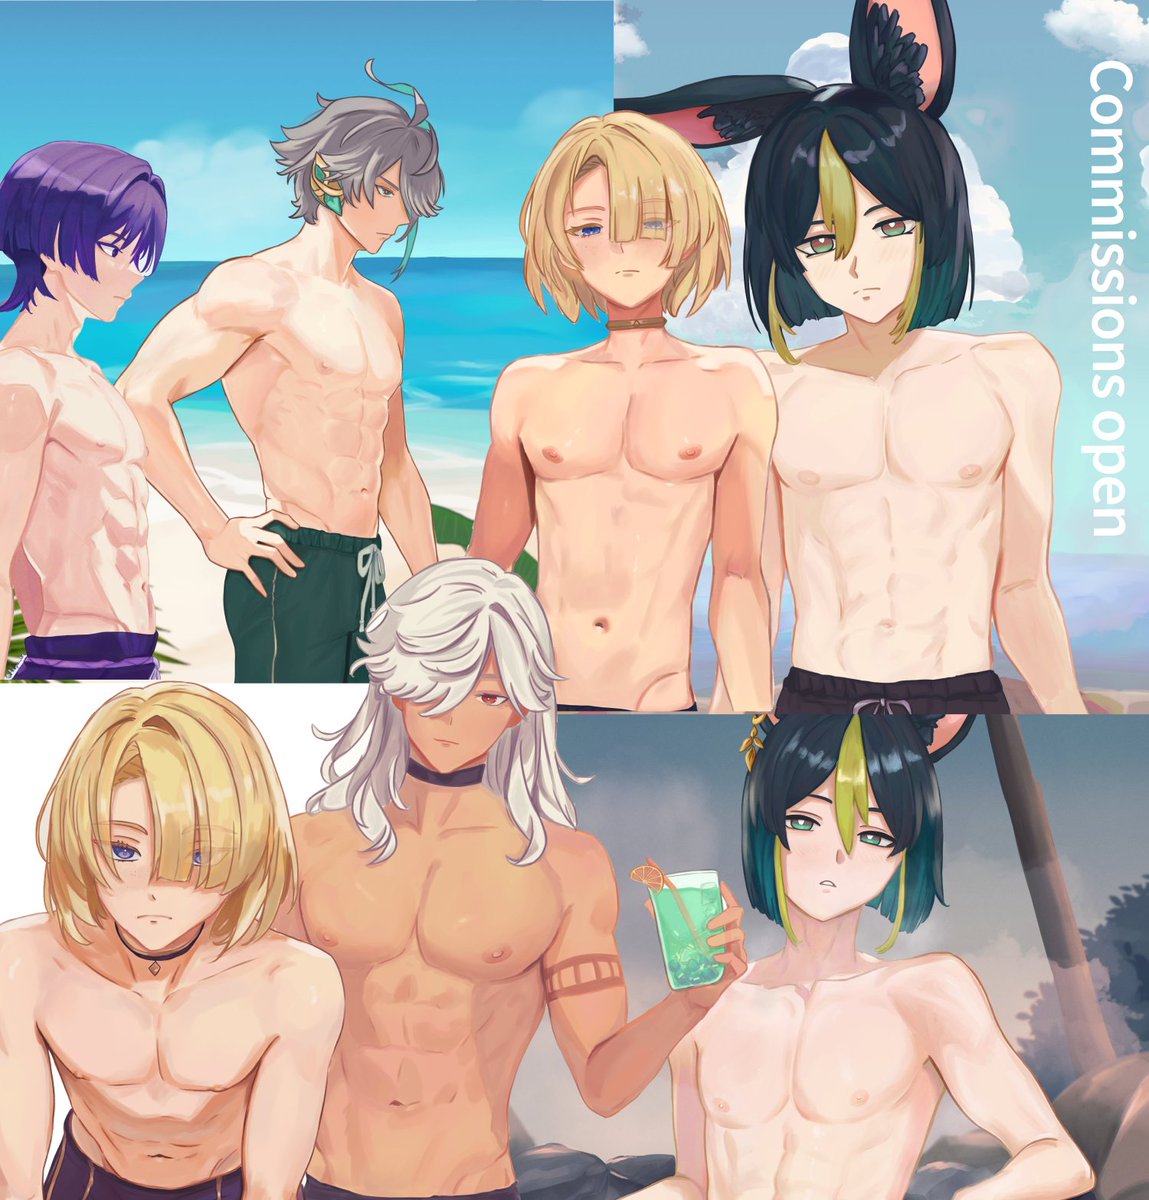 #commissionsopen for shirtless males!
See ➡️ vgen.co/Arupi
I do #GenshinImpact but not exclusively